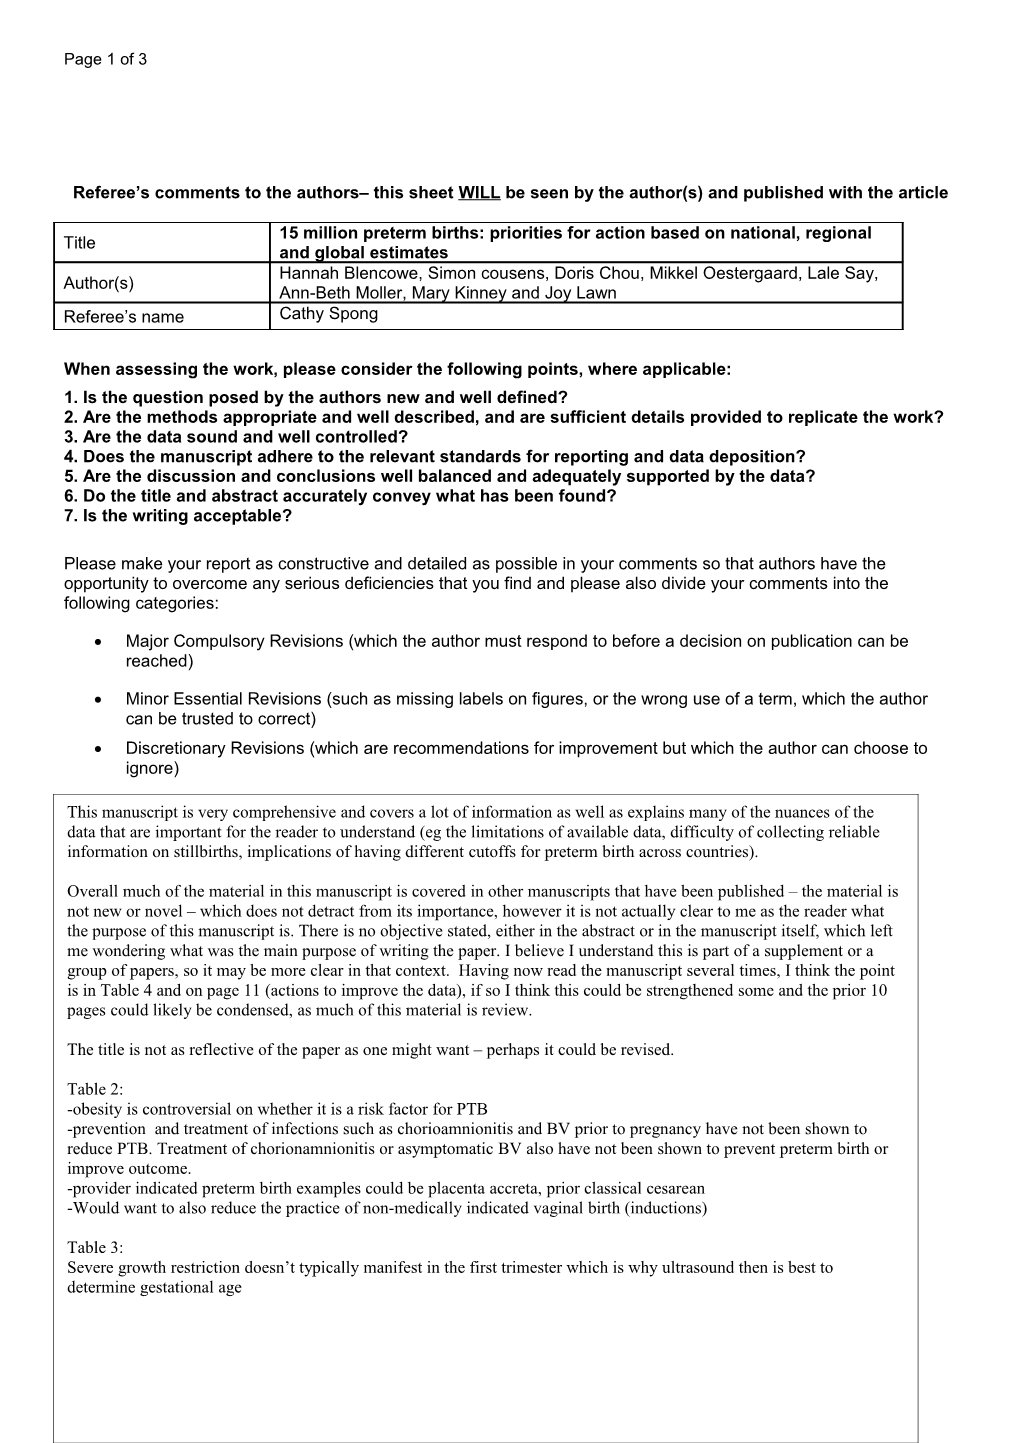 Comissioned Articles Referee Report Form s1